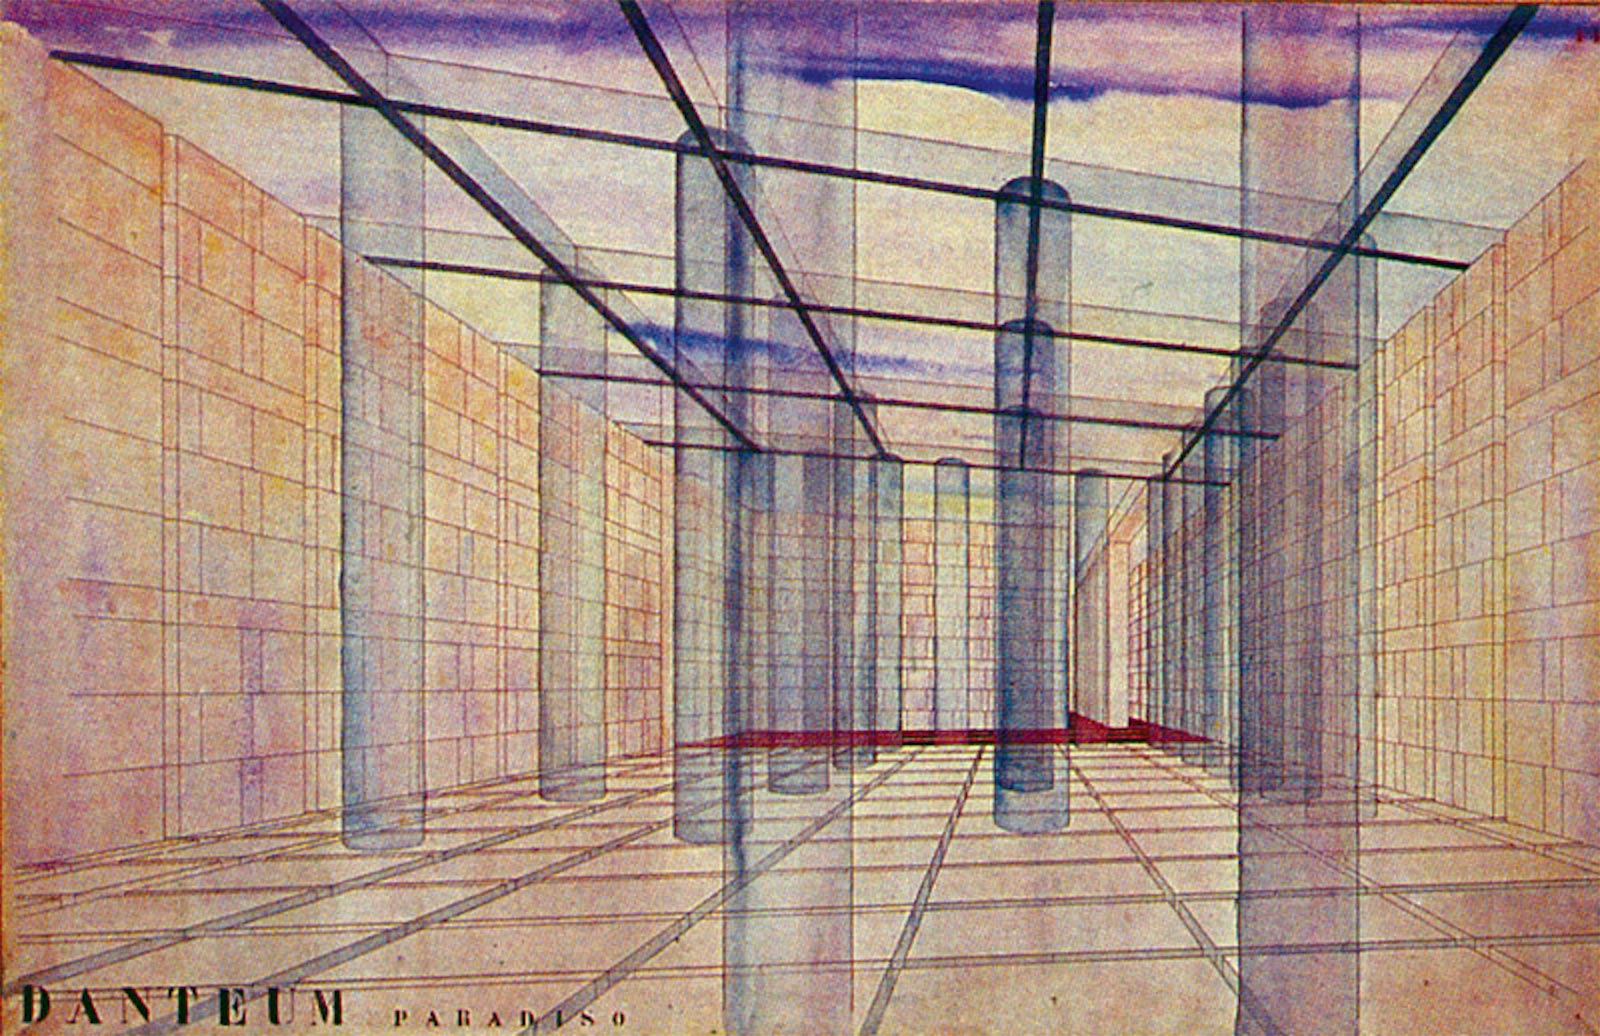 Terragni’s proposal for the Paradiso Room in the Danteum.